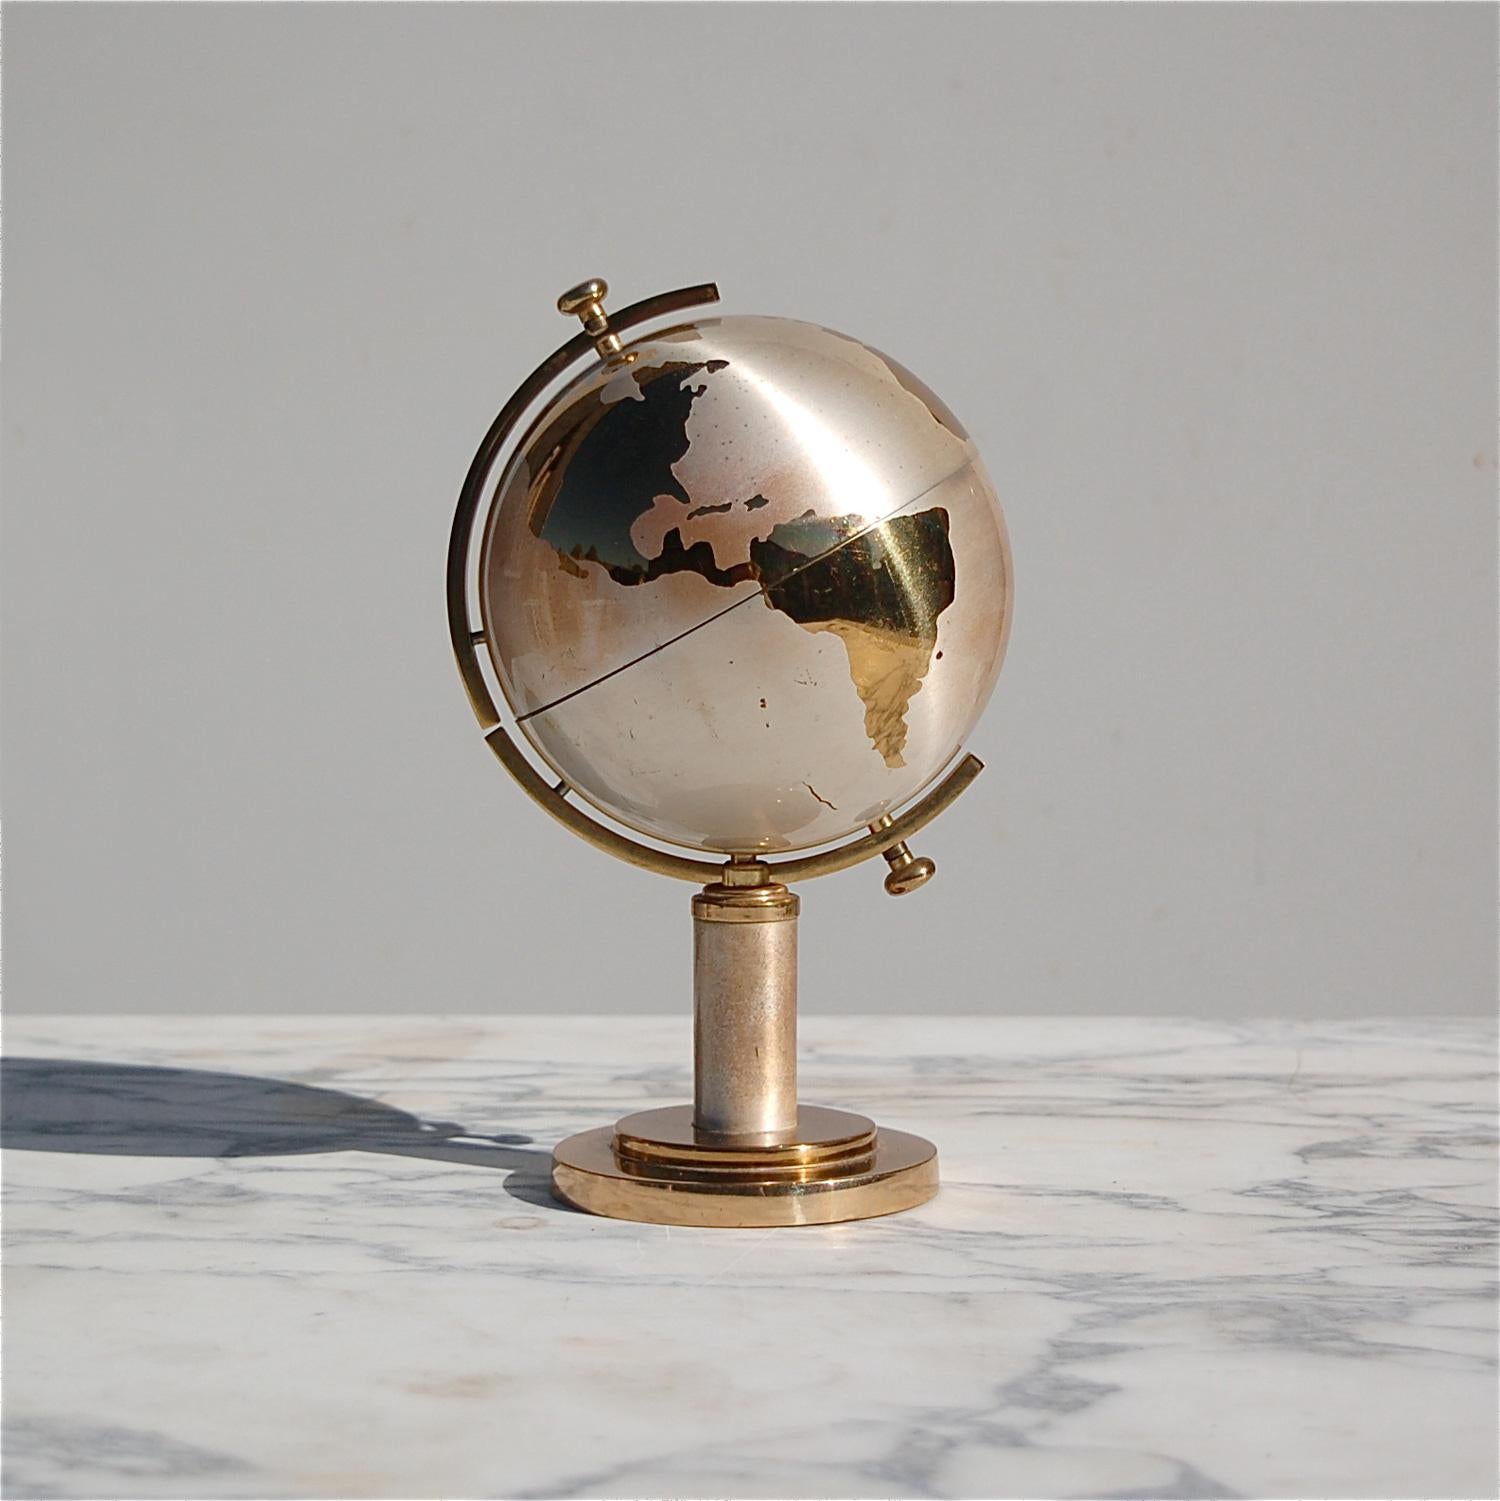 At first sight, you'd never imagine this shiny globe would morph into a cigarette dispenser. By a simple pull, the top hemisphere slides open revealing the inner compartment with room for 25 cigarettes. This lovely decorative item is very evocative